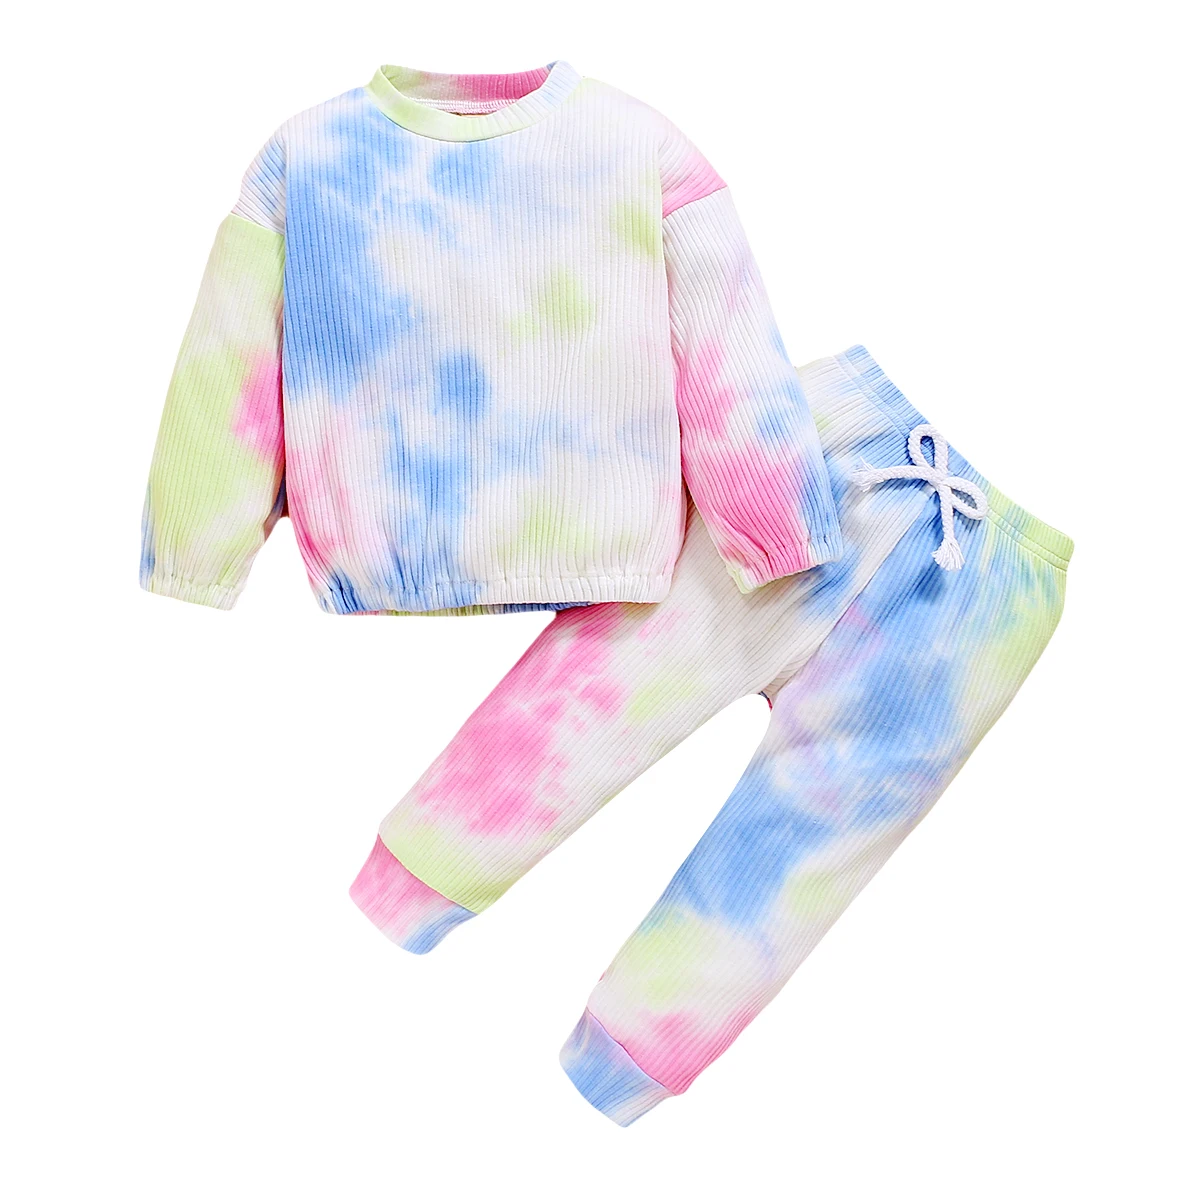 

OPPERIAYA Baby Tie-dye casual Suit Long Sleeves Tops Trousers Elastic Waist Ribbed Closing Spring Autumn Clothing